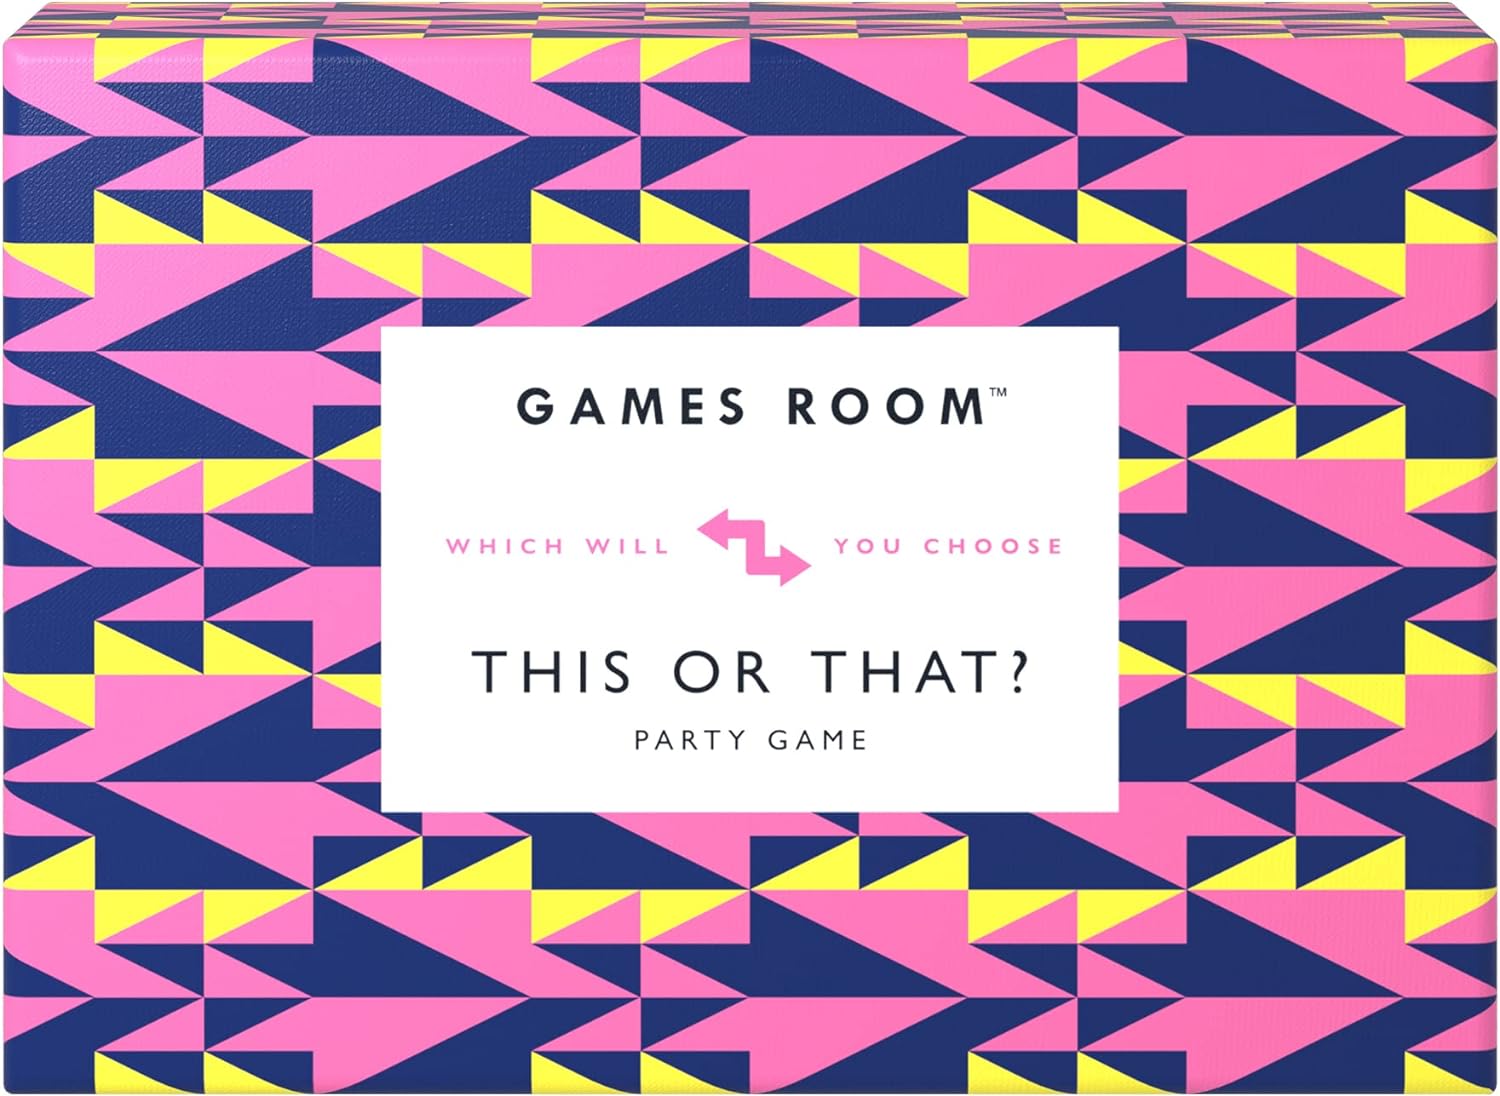 This or That? Party Game